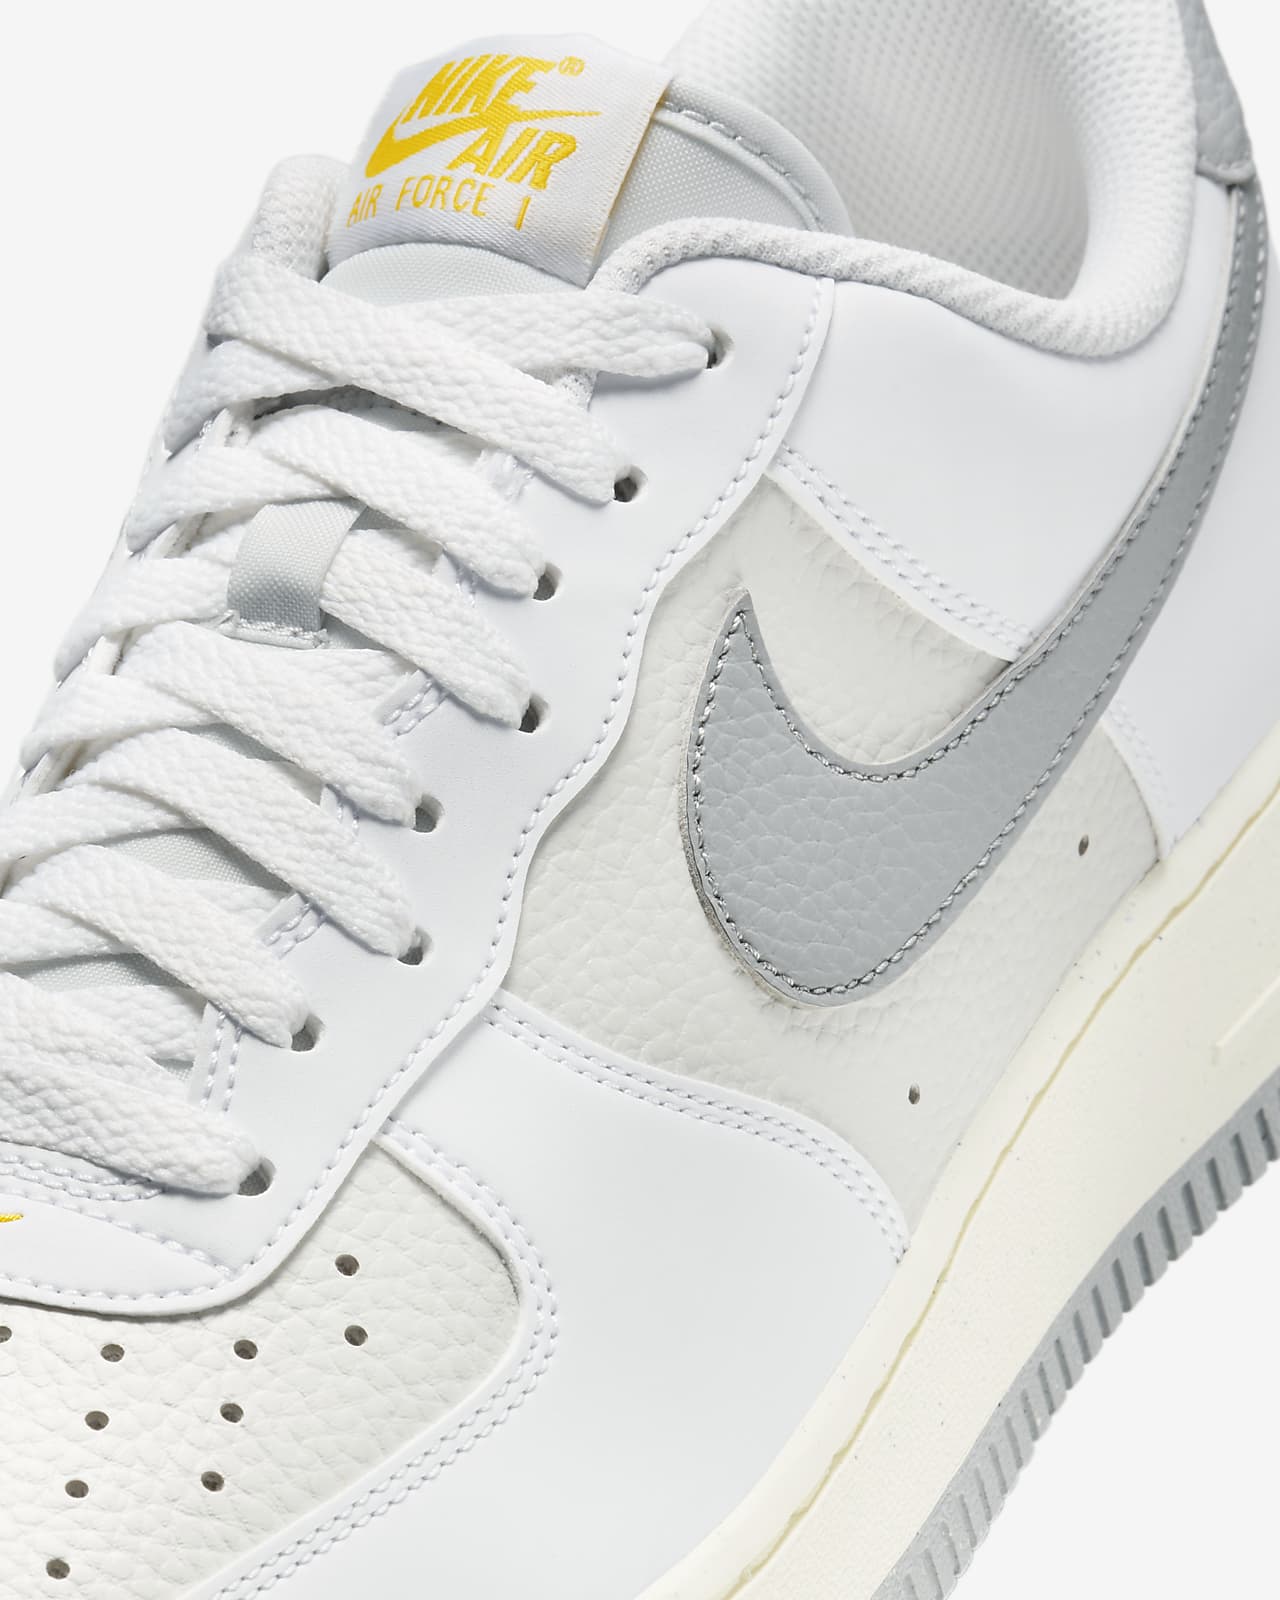 Chaussure Nike Air Force 1 '07 pour Homme. Nike FR